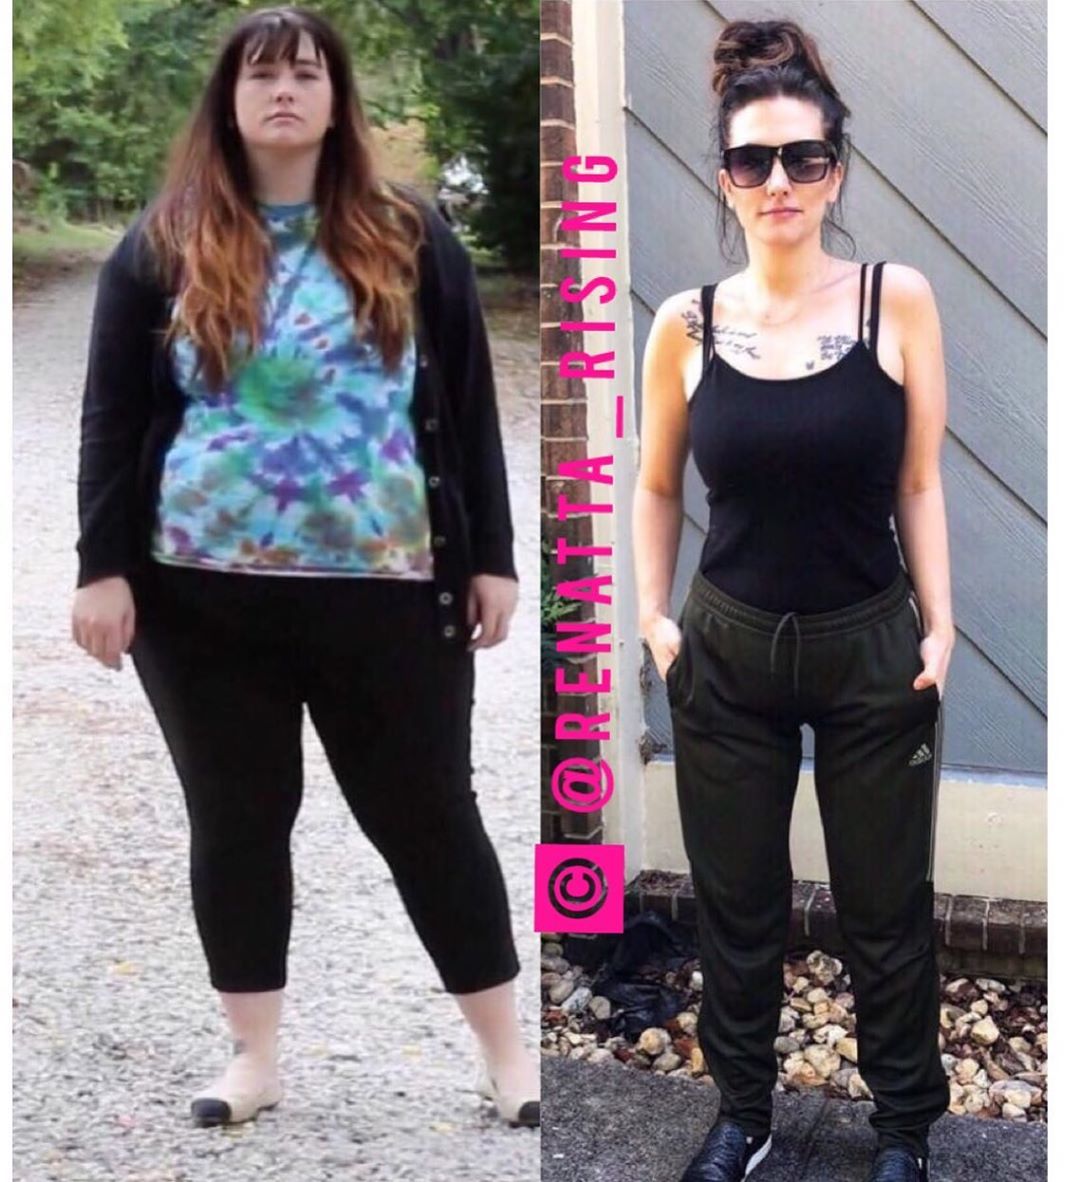 290lbs Woman Lost Over 140lbs After A Humiliating Incident.